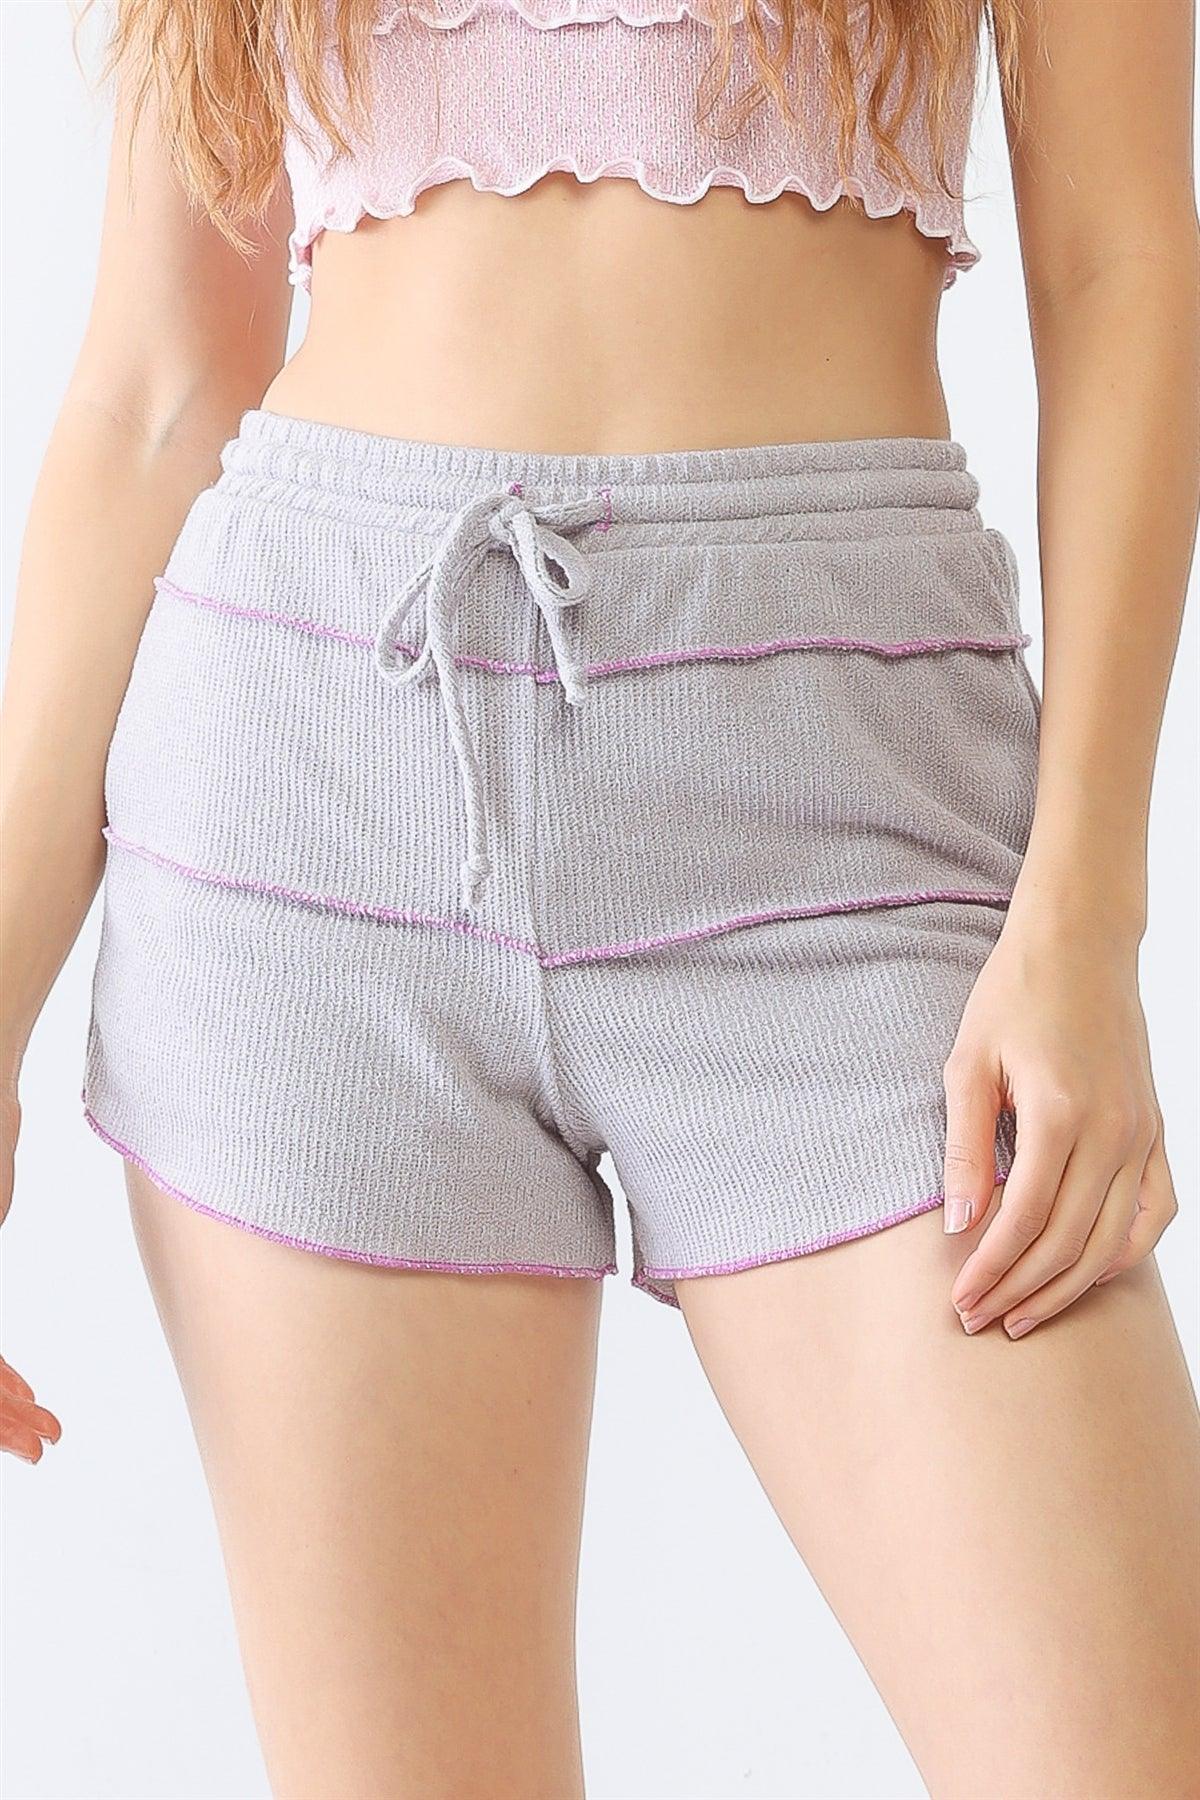 Lavender Knit Inside-Out High Waist Shorts /2-2